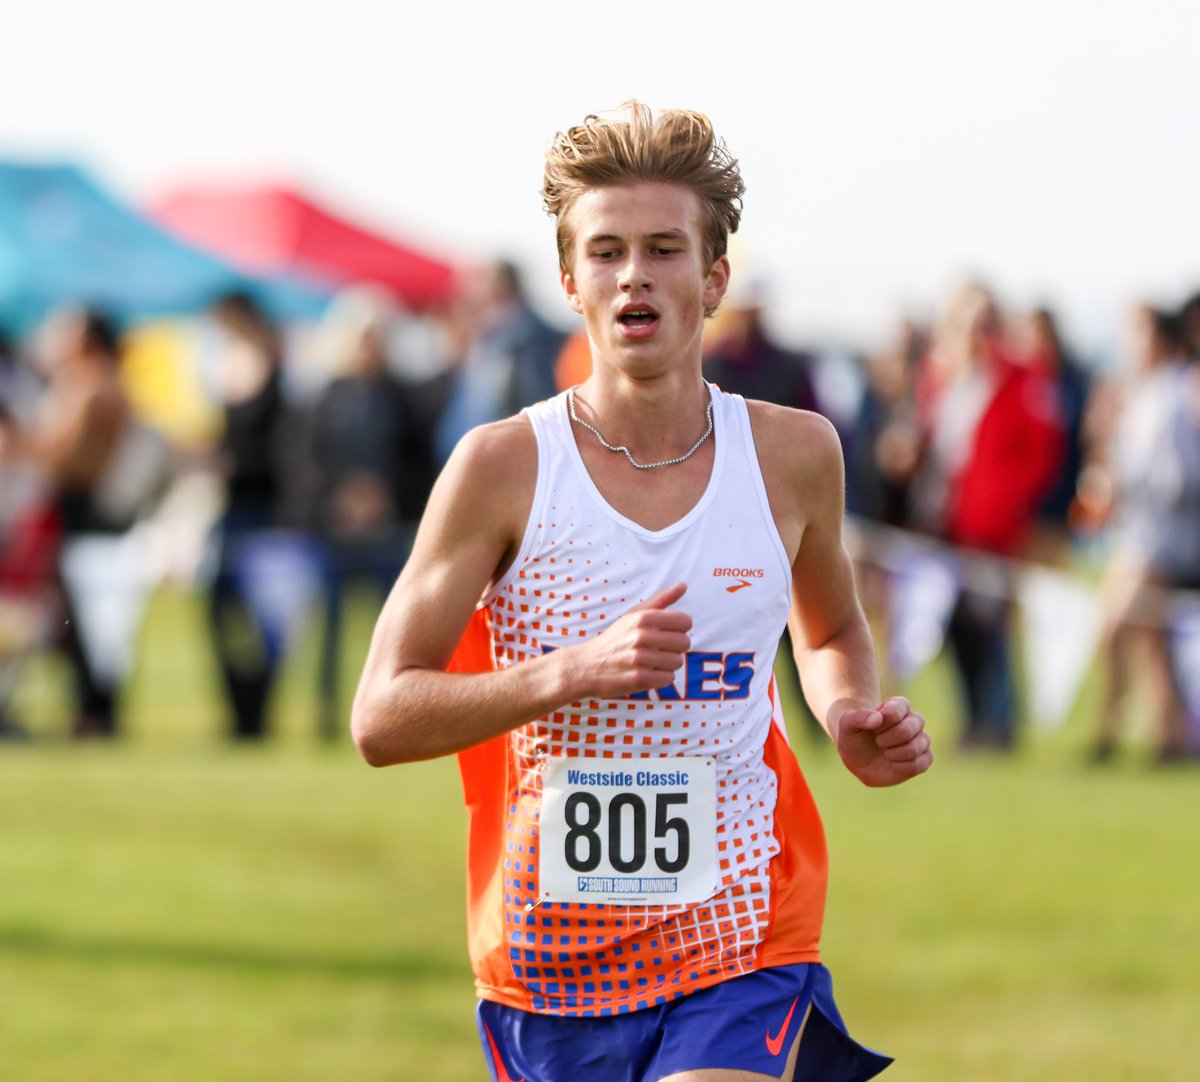 Cruize Corvin of Lakes sets the course record at the 3A Westside Classic in a time of 15:14.8